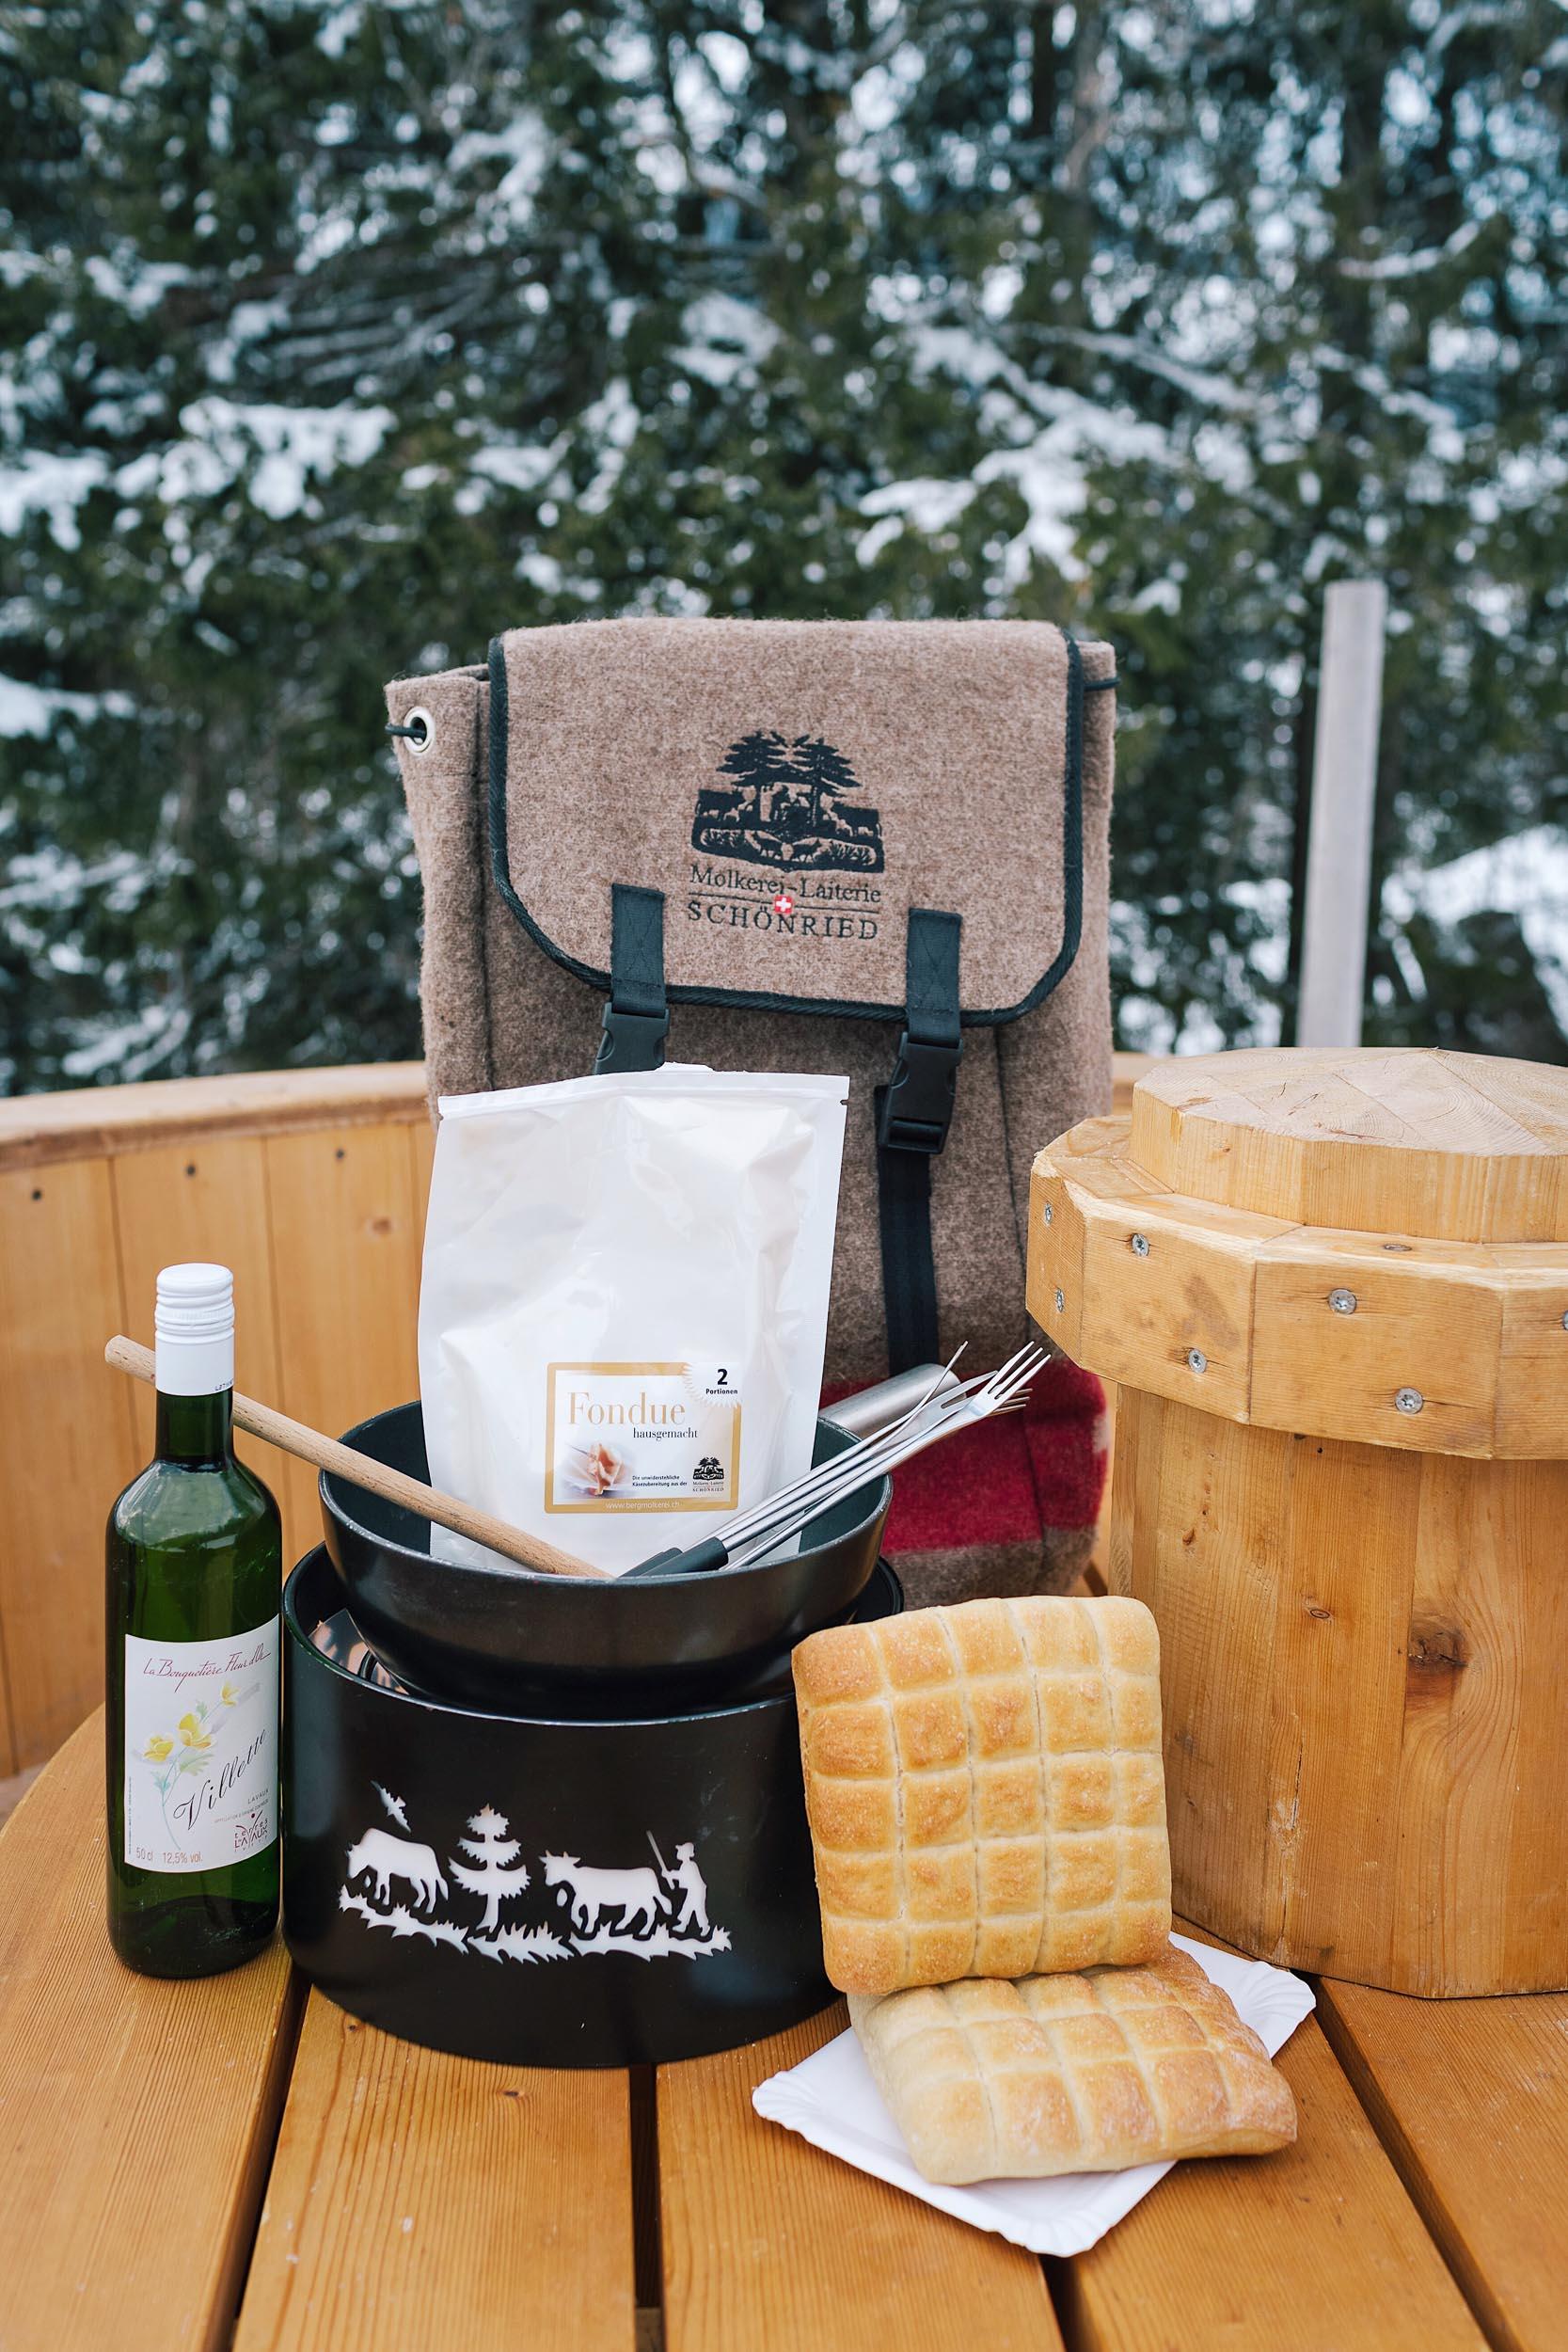 Before you start your fondue hike in Gstaad, you'll want to pick up a fondue backpack